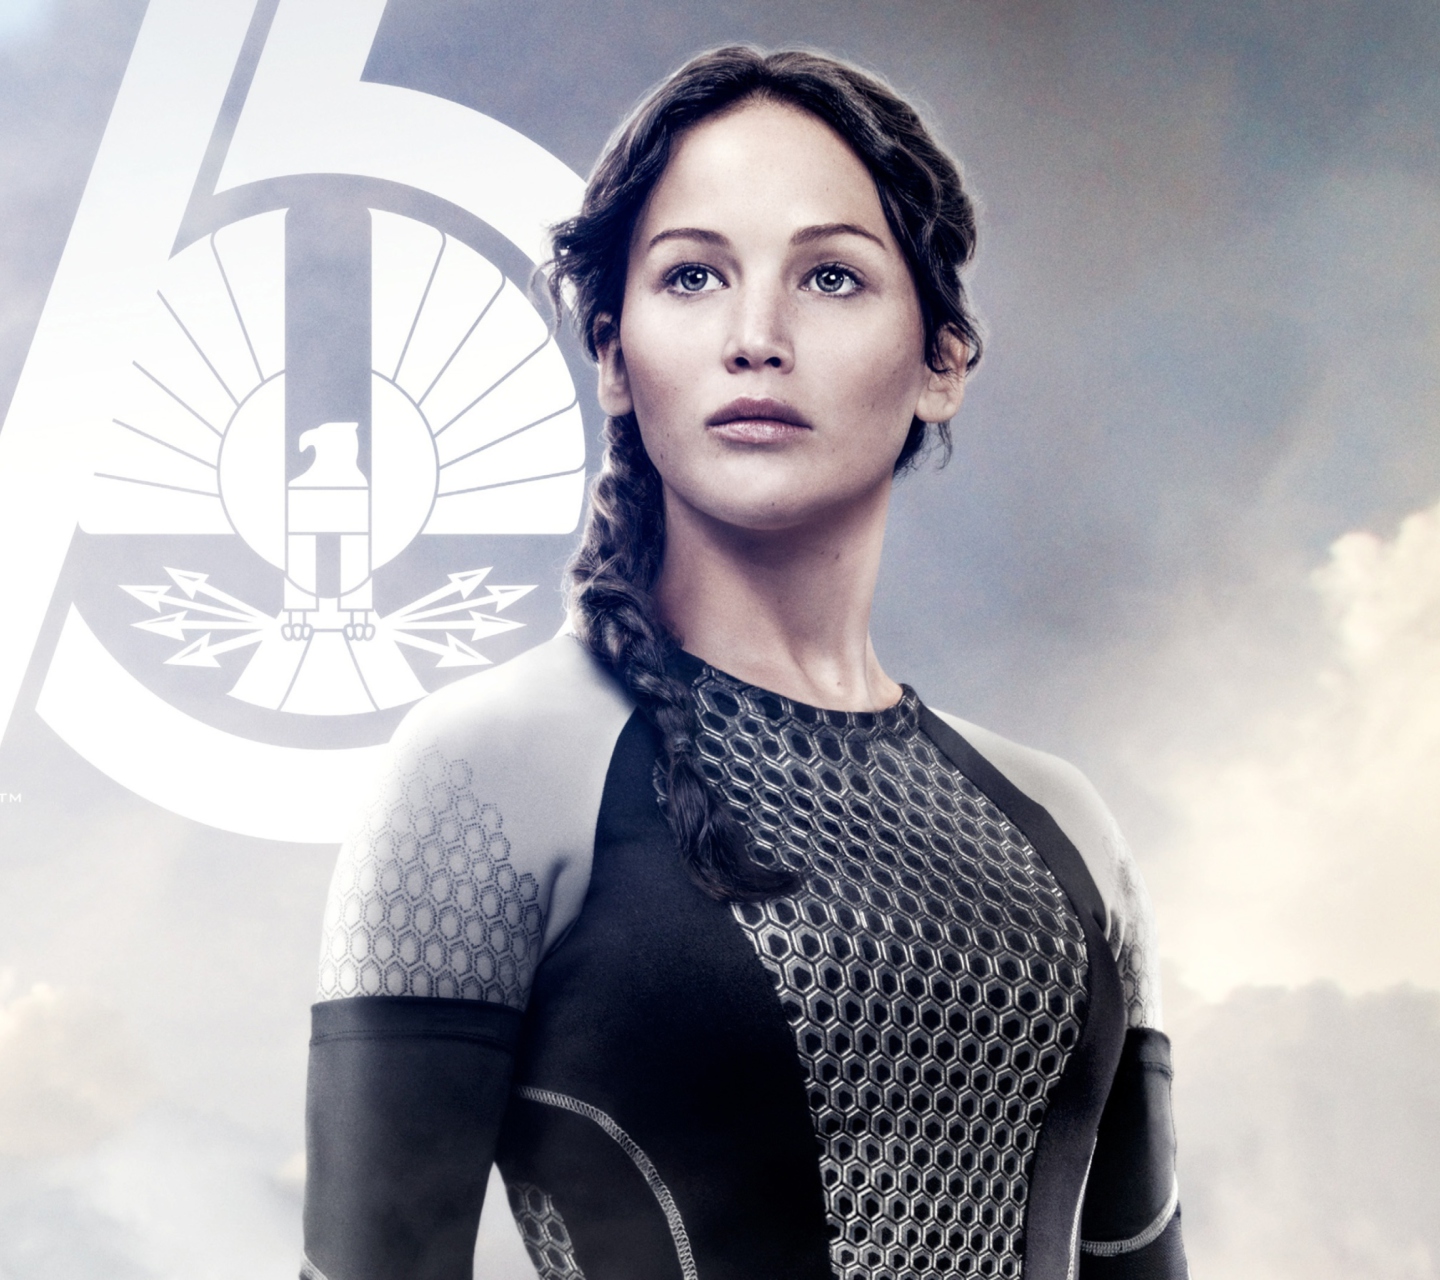 Jennifer Lawrence In The Hunger Games Catching Fire screenshot #1 1440x1280